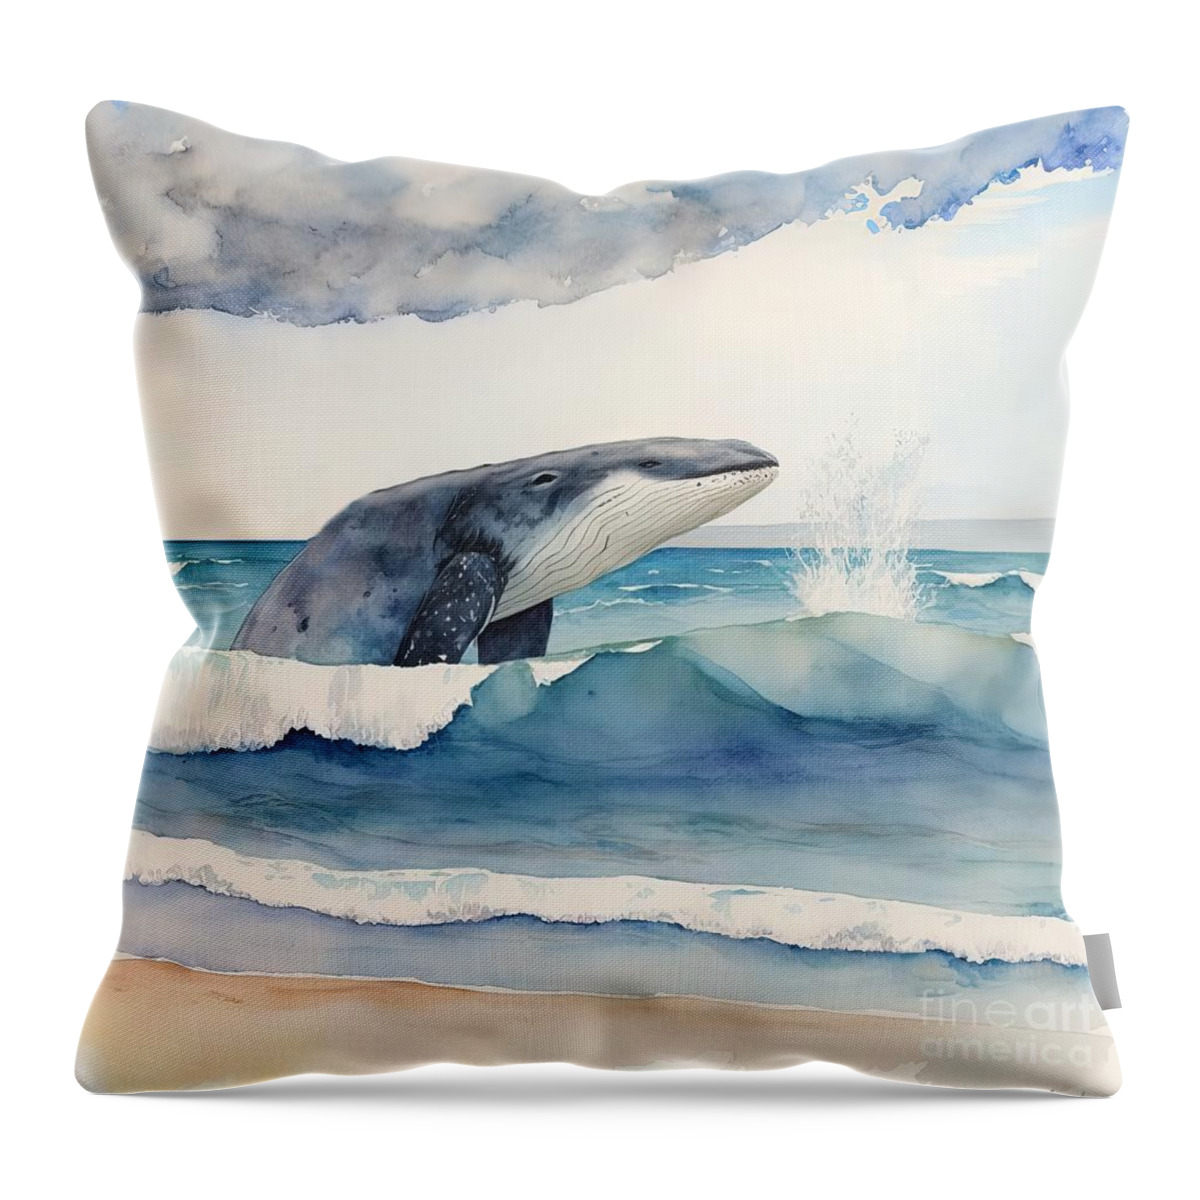 Wildlife Throw Pillow featuring the painting Whale At The Ocean Beach by N Akkash